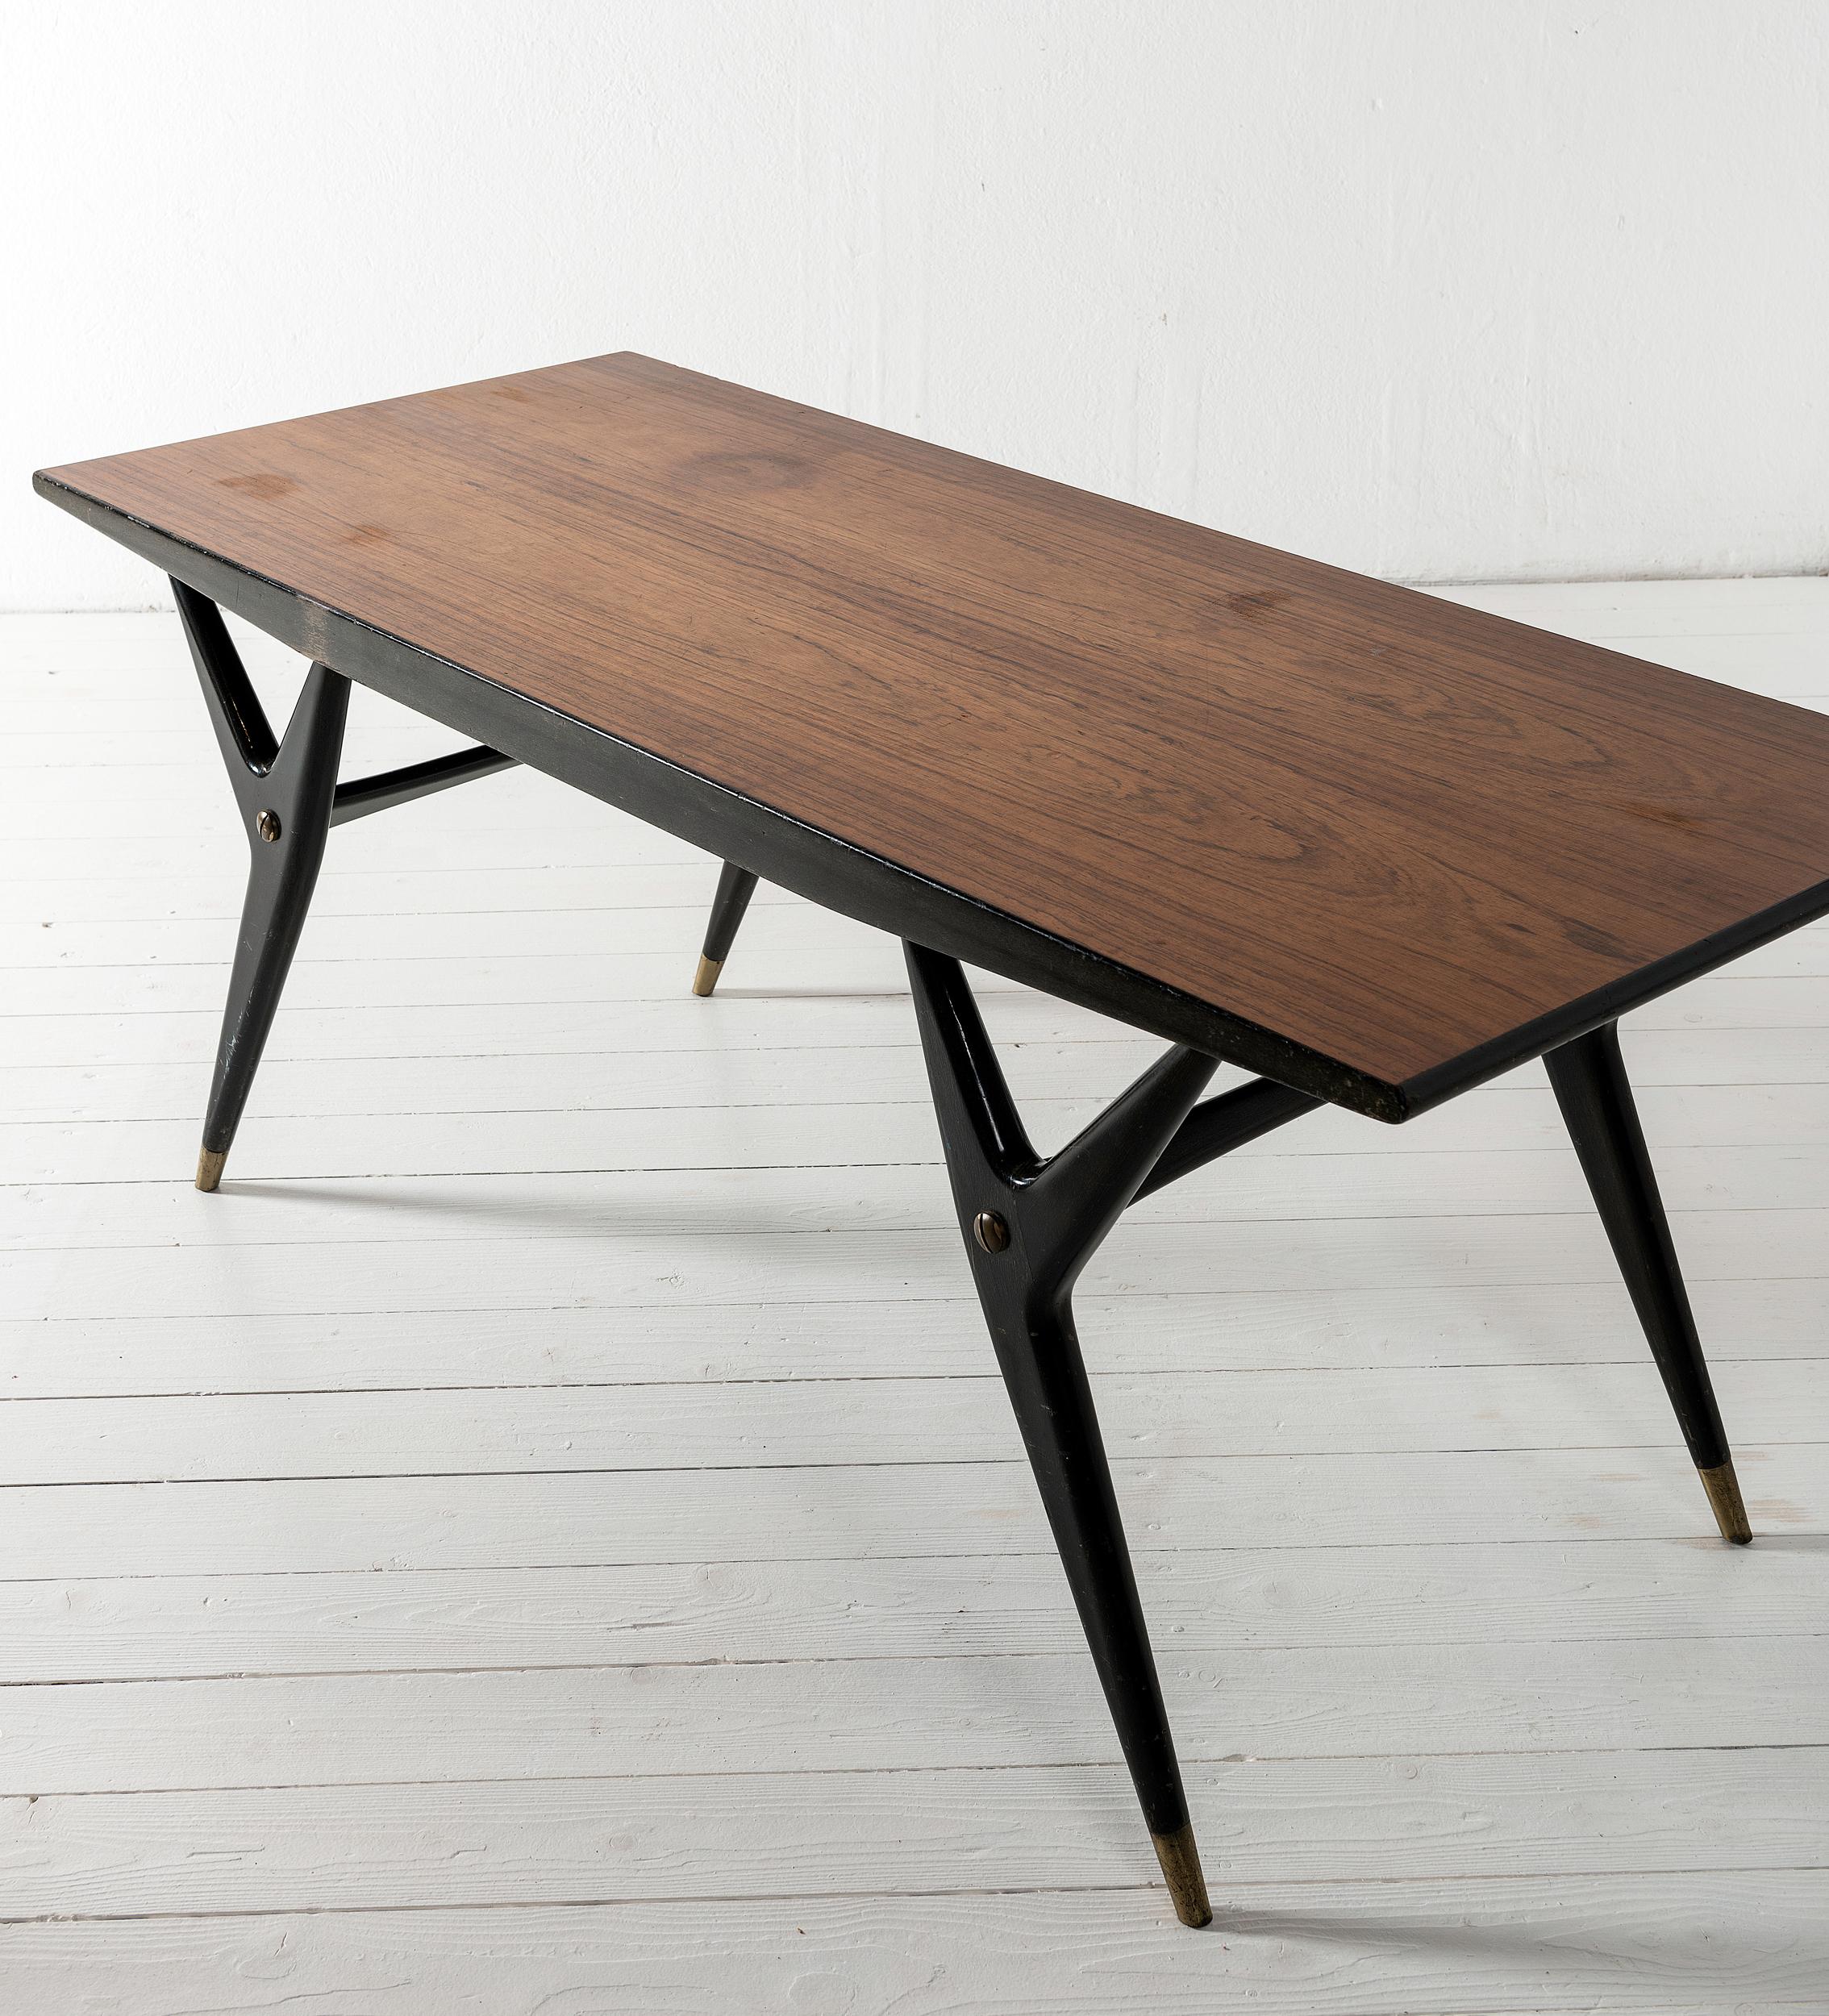 Swedish Stylish Original 1950s Design Coffee Table Attributed to Ico Parisi For Sale